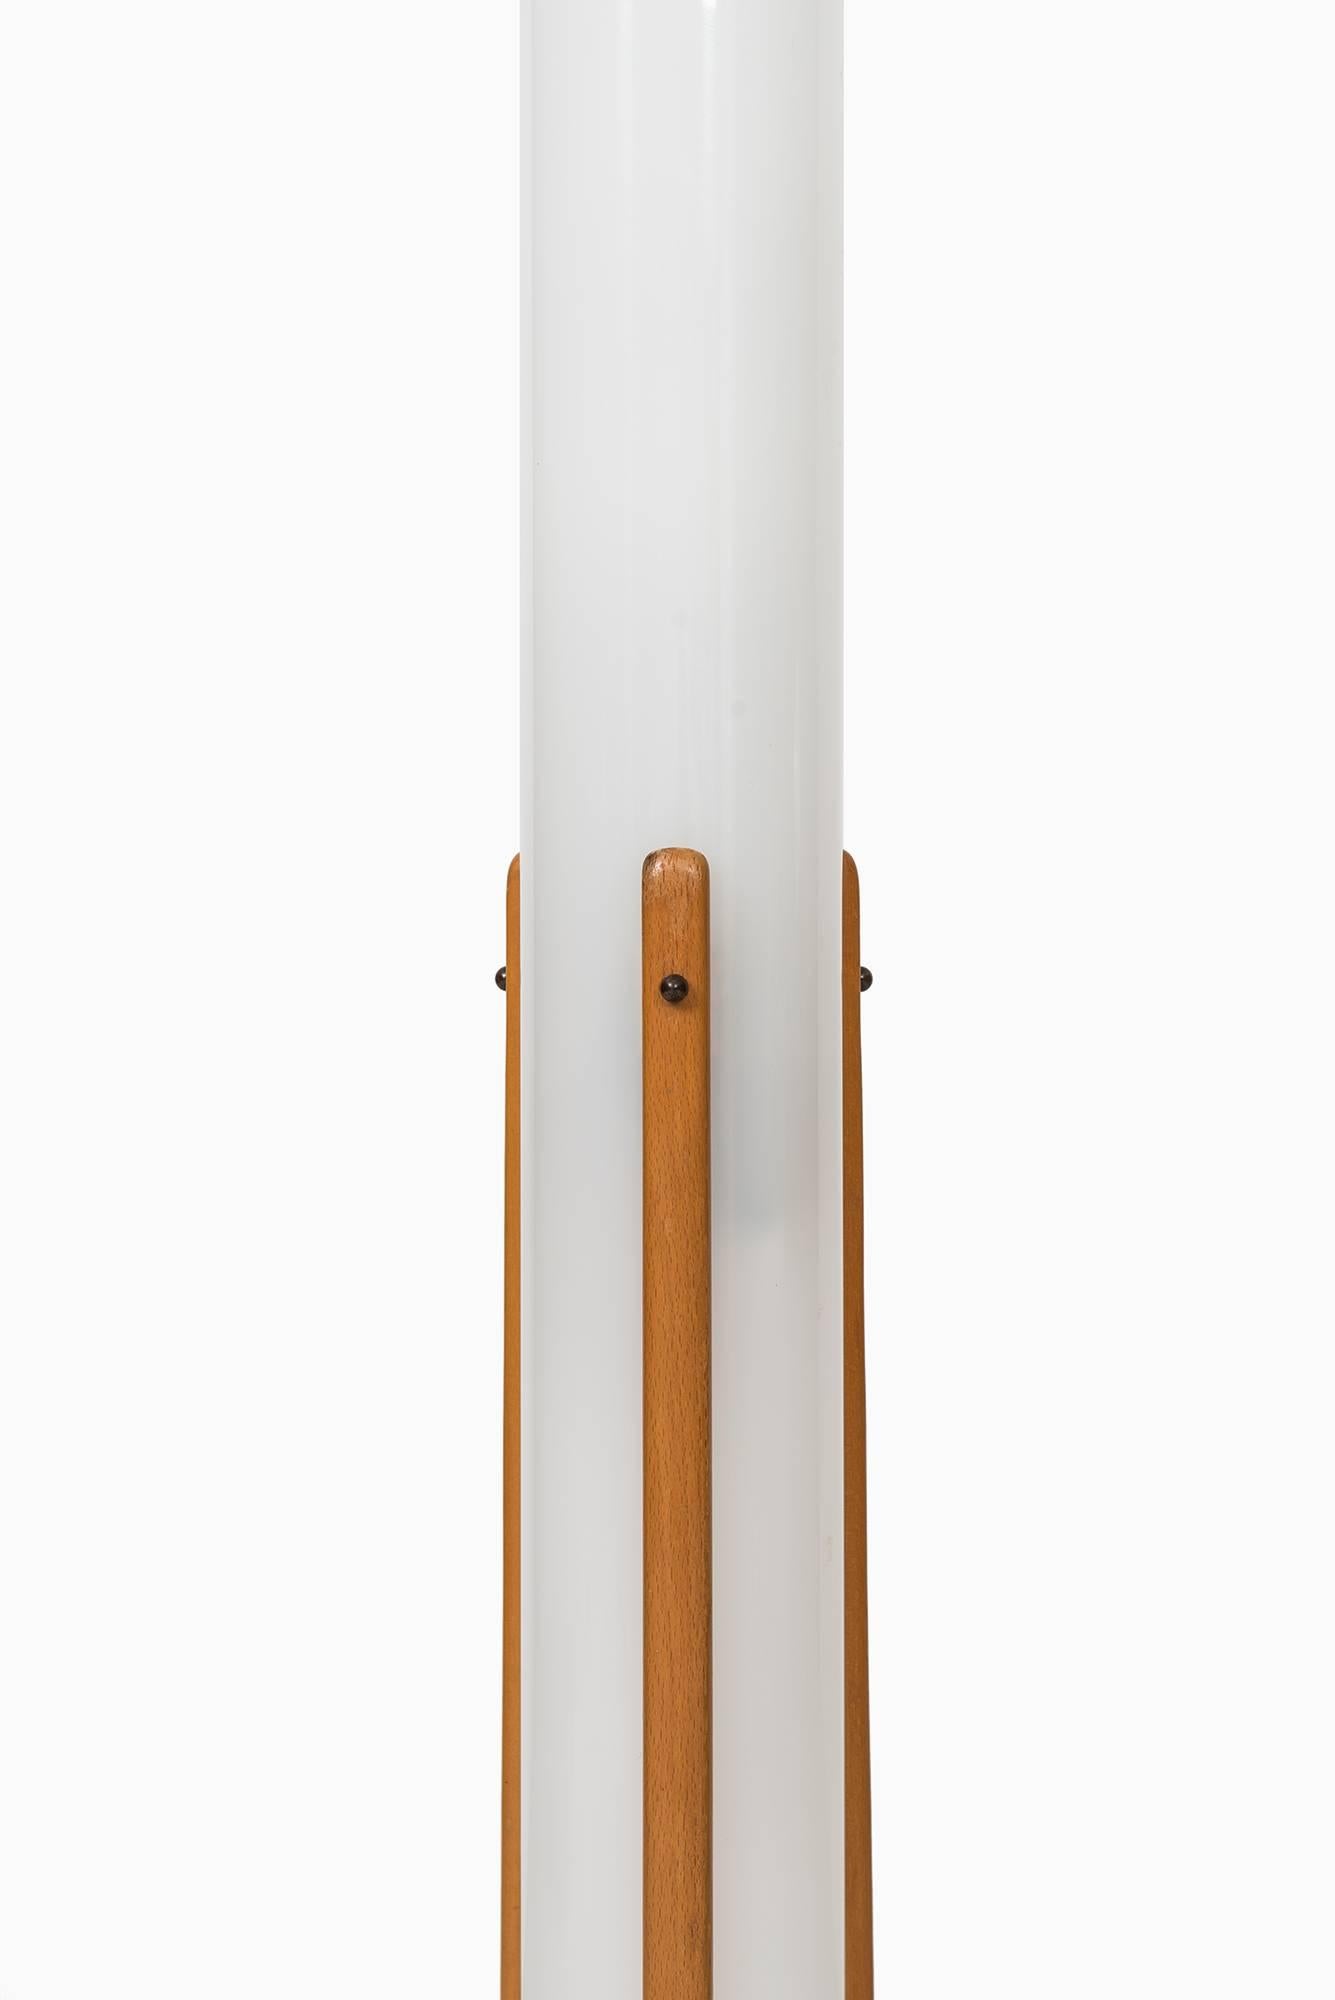 Rare floor lamp designed by Eric Elfwén. Produced in Sweden.